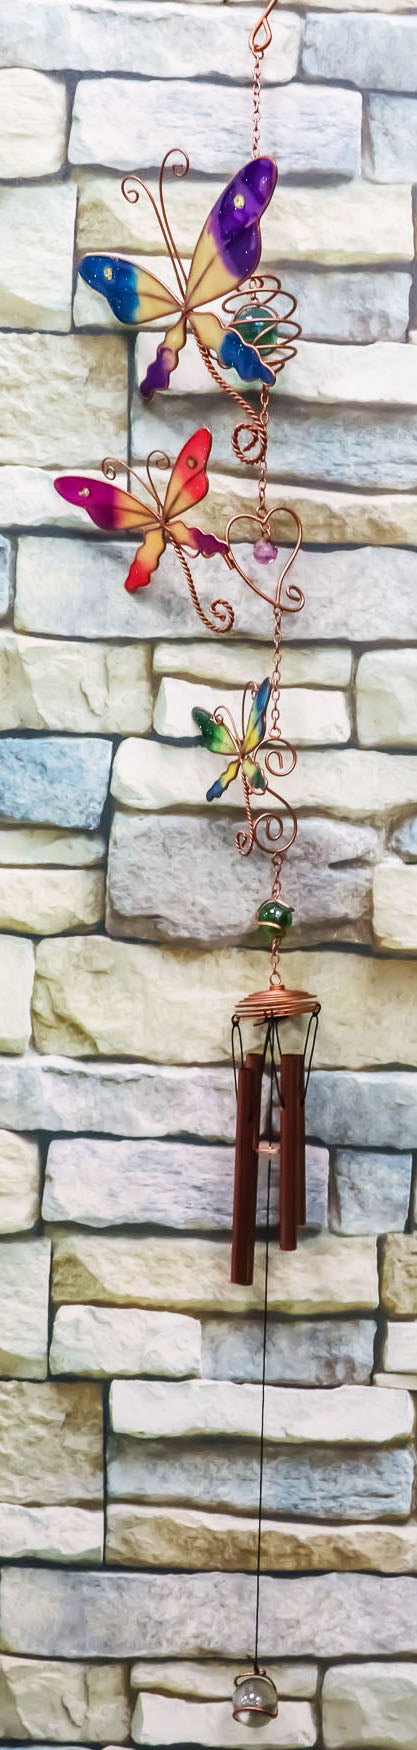 Ebros Gift Stained Glass Colorful Three Butterflies Copper Metal Wind Chime 28"Long Resonant Outdoor Patio Garden Decor Accessory